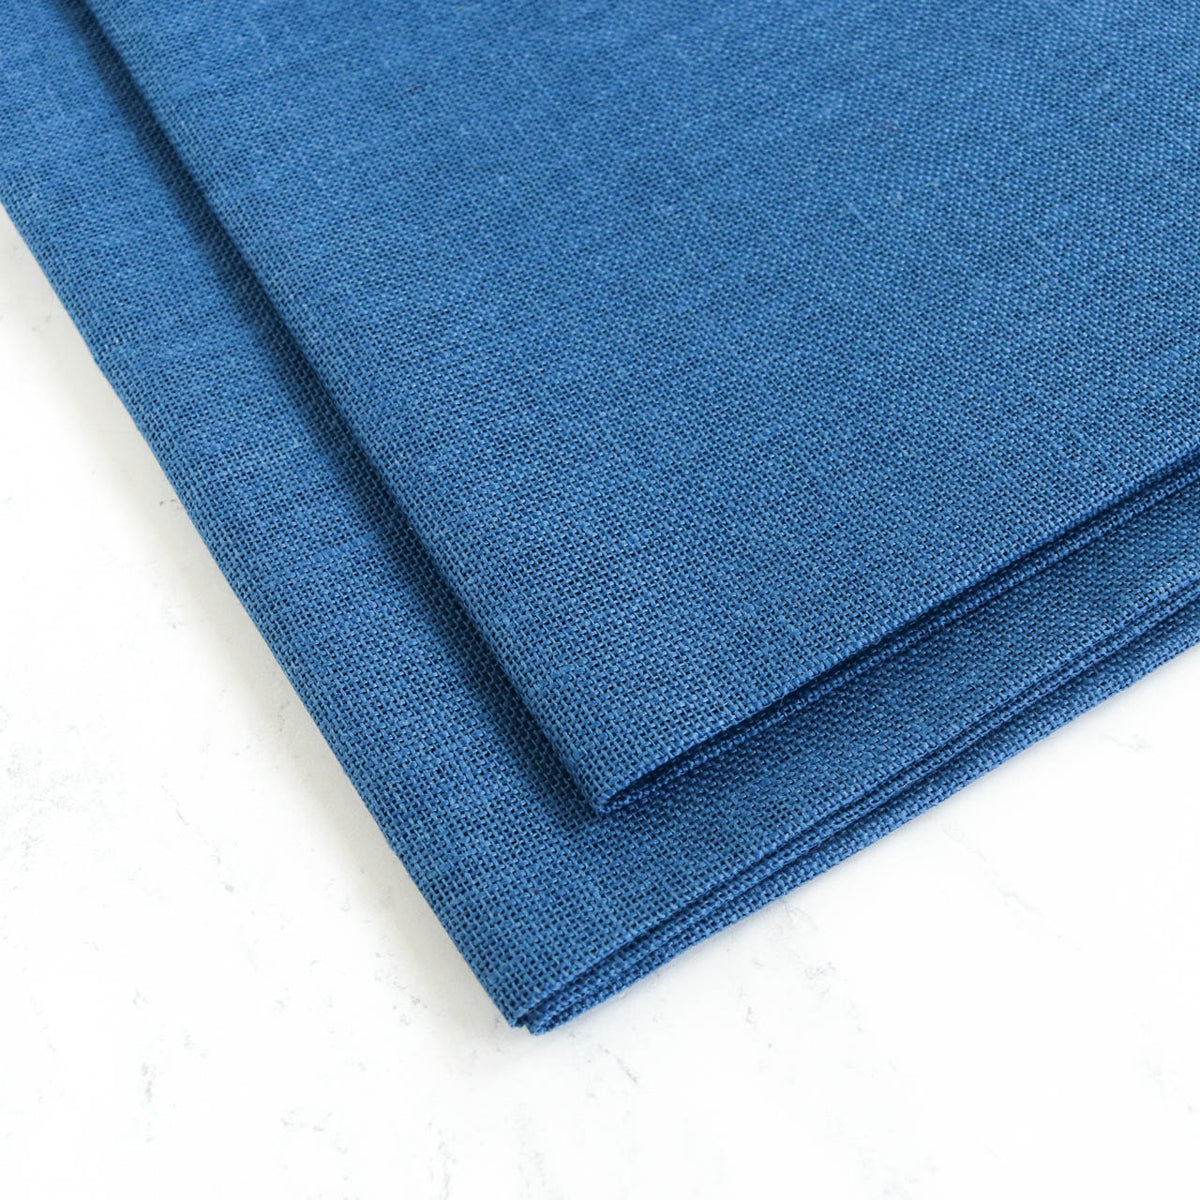 Nordic Blue Linen Fabric - 28 count